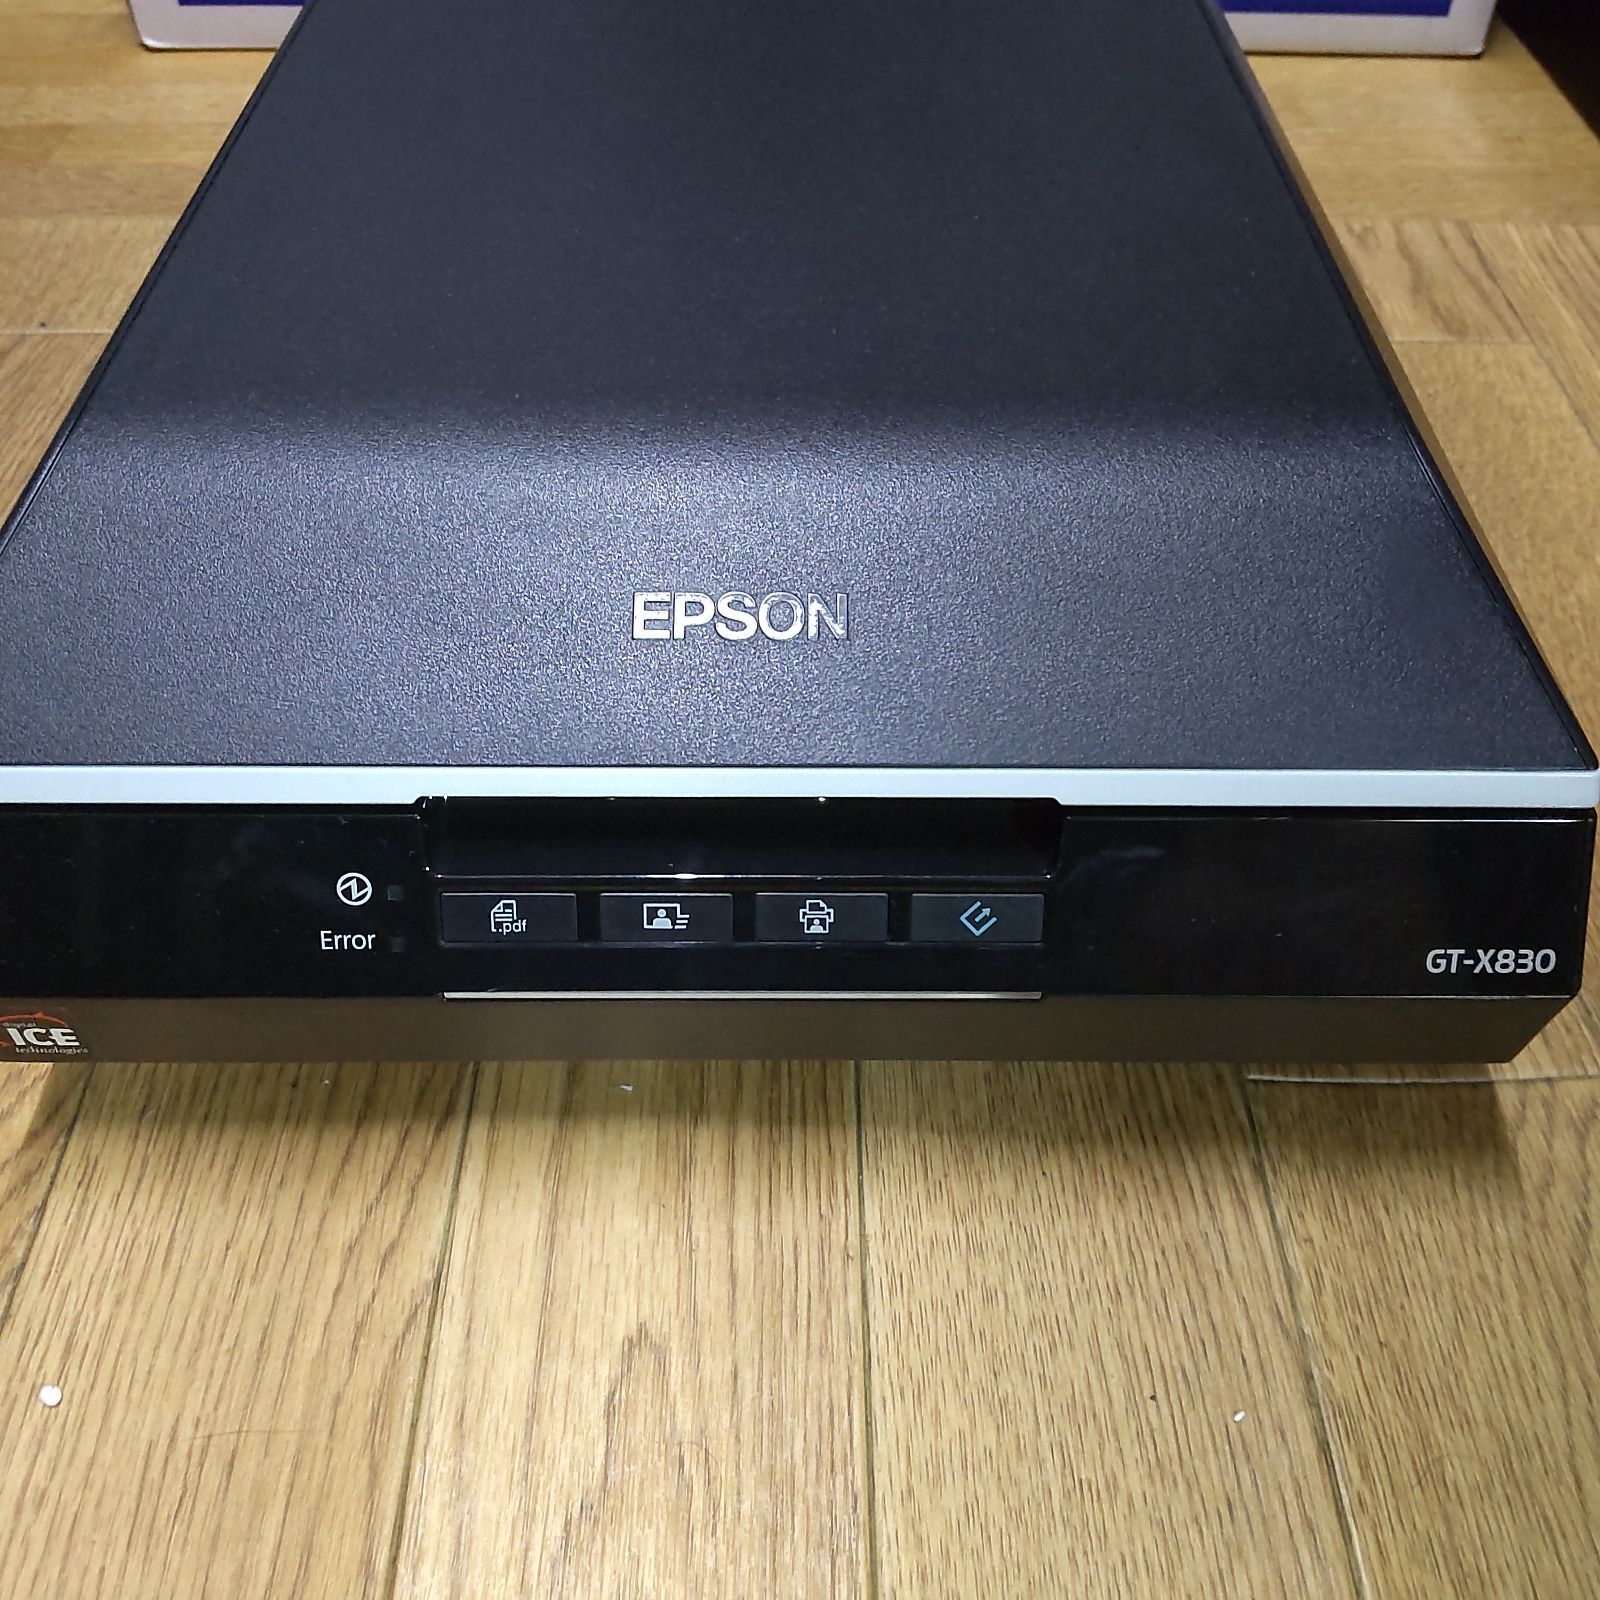 EPSON GT-X830 フィルムスキャナー フィルムホルダー付属 動作良好電子書籍